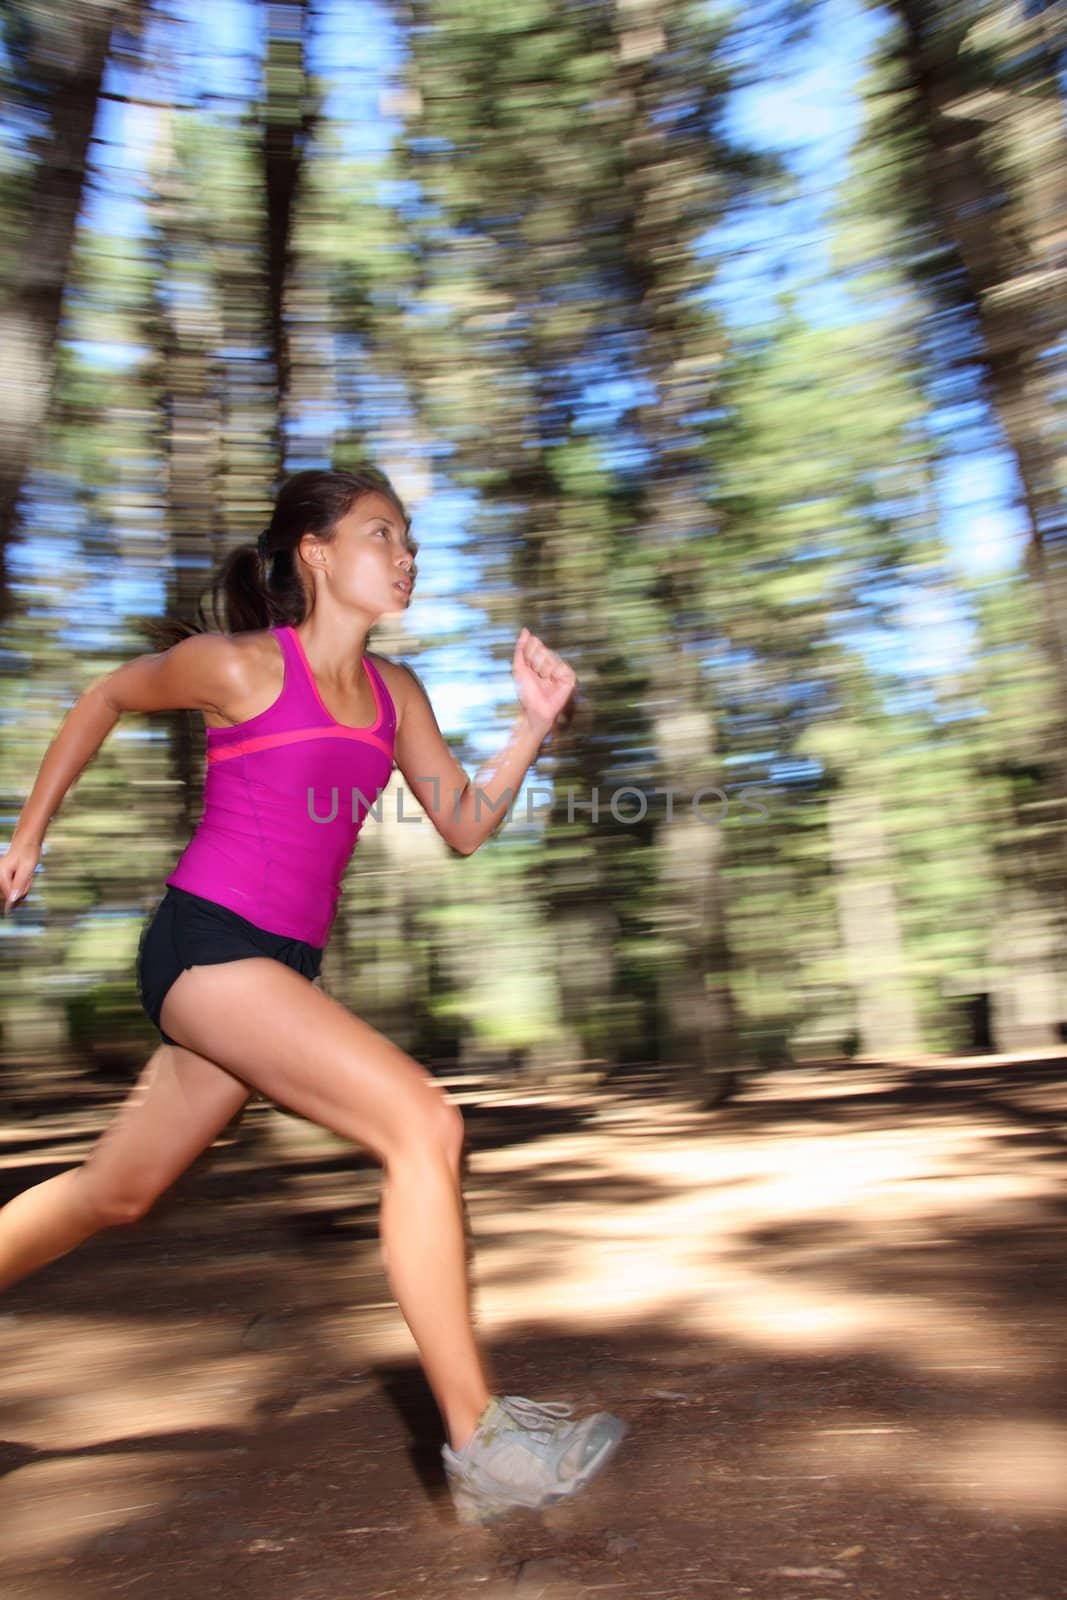 Runner, Female running fast in forest. Mot�on blurred image of beautiful Asian / Caucasian woman athlete sprinting outdoors in tank top - copy space.